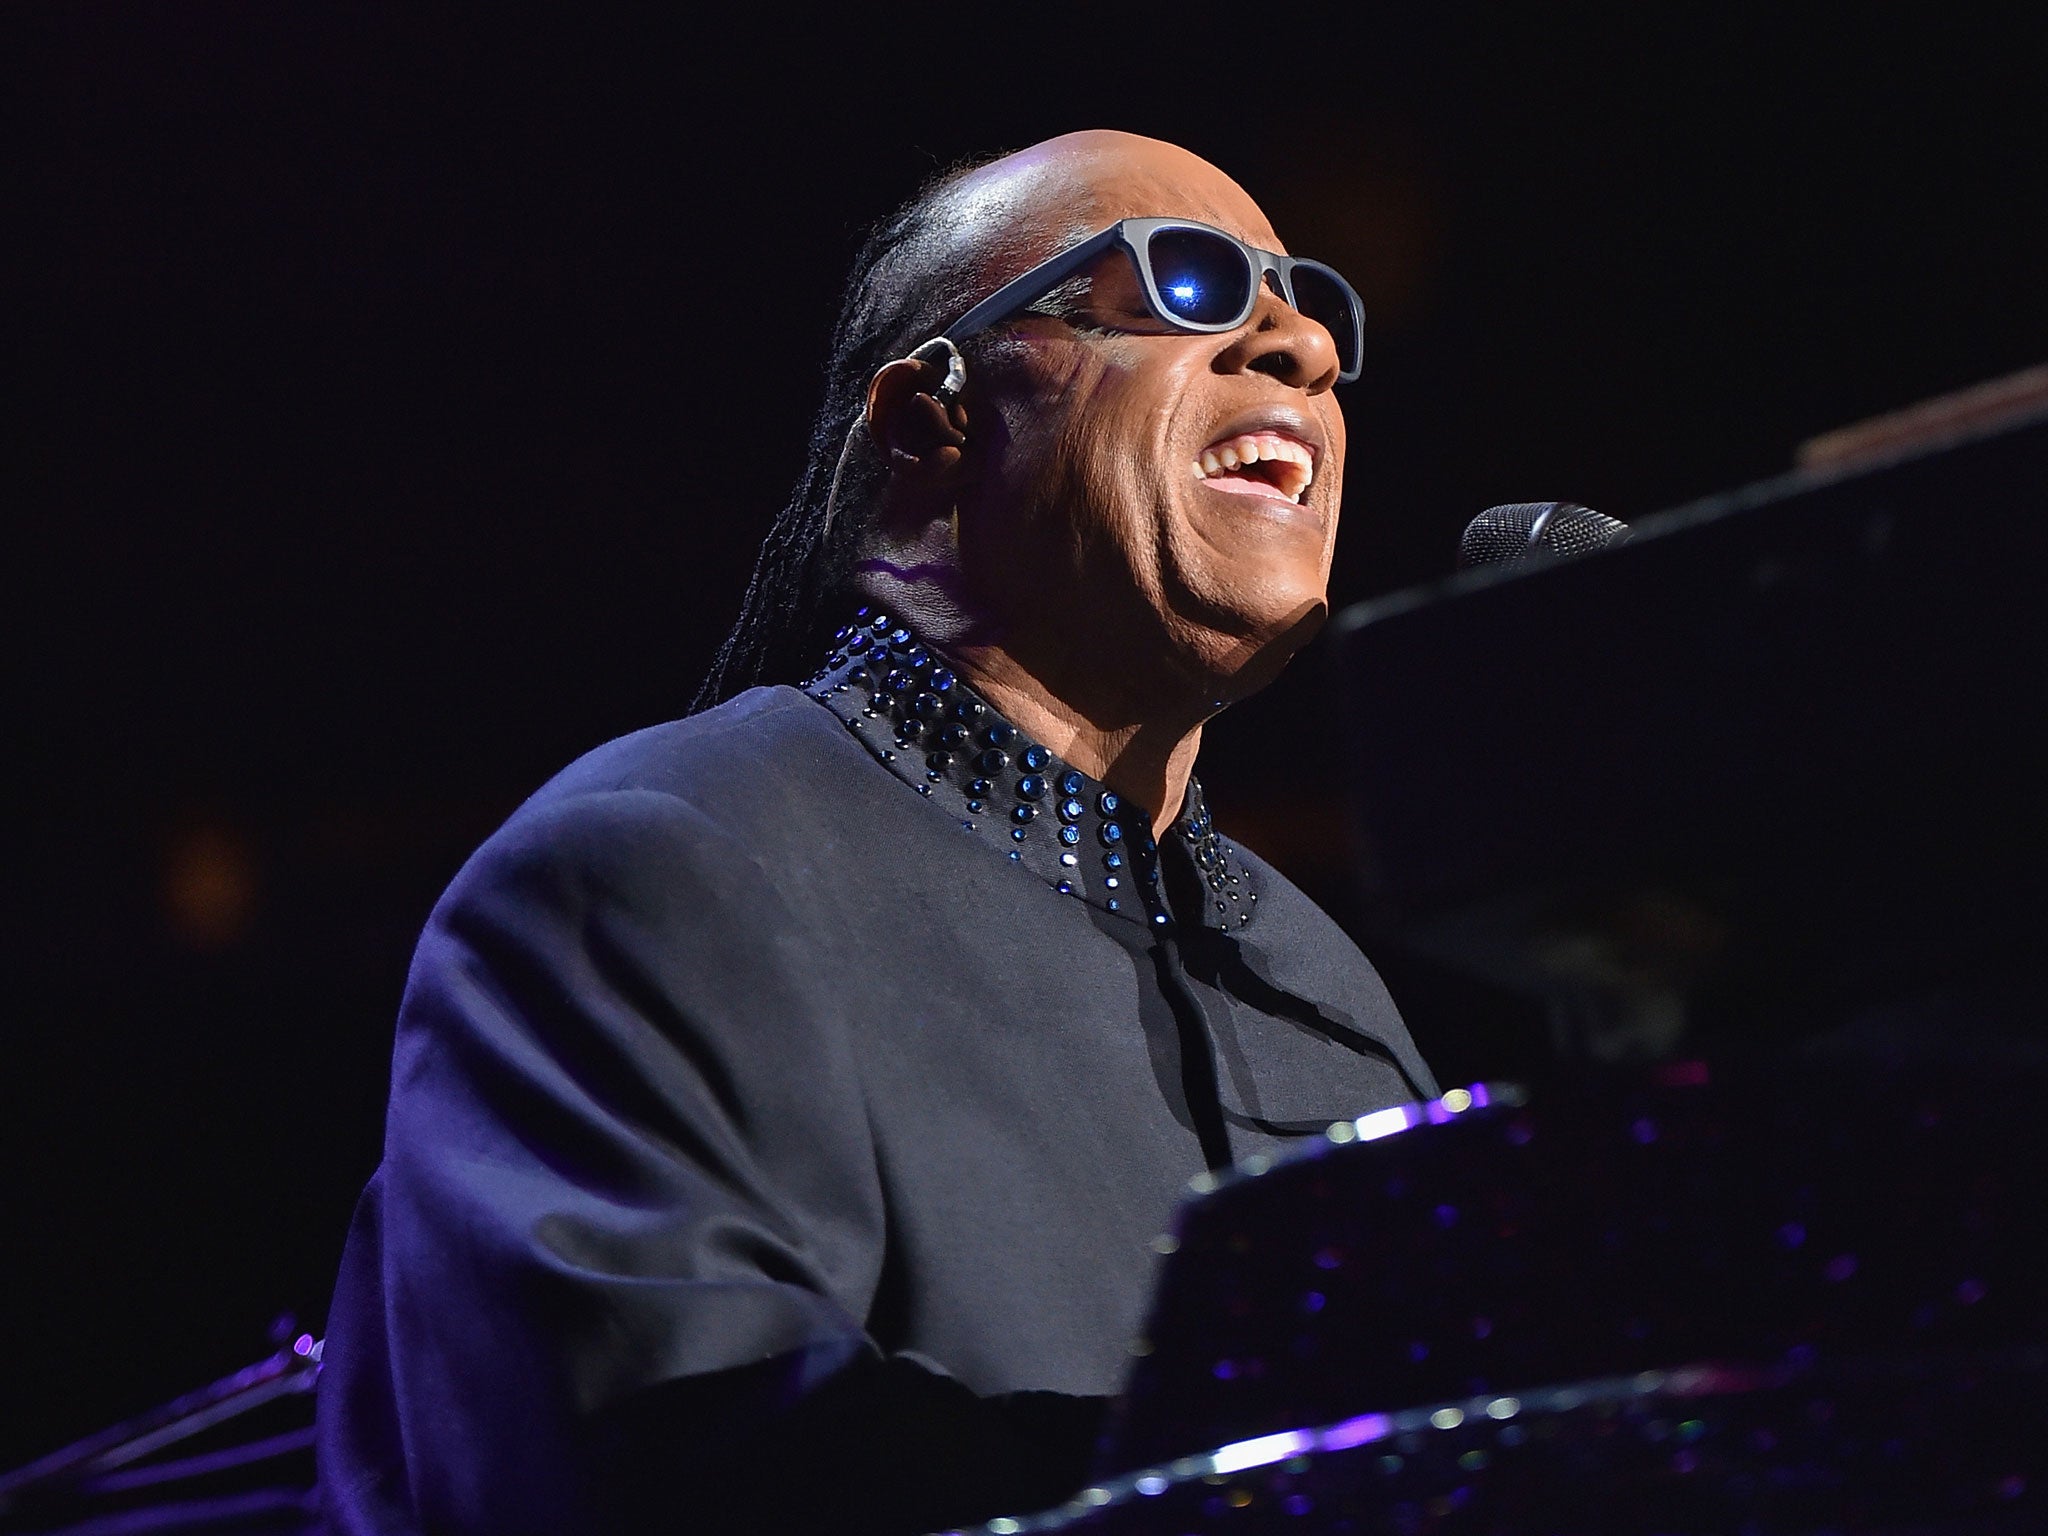 Gary Catona has worked with a number of high profile singers including Stevie Wonder, pictured